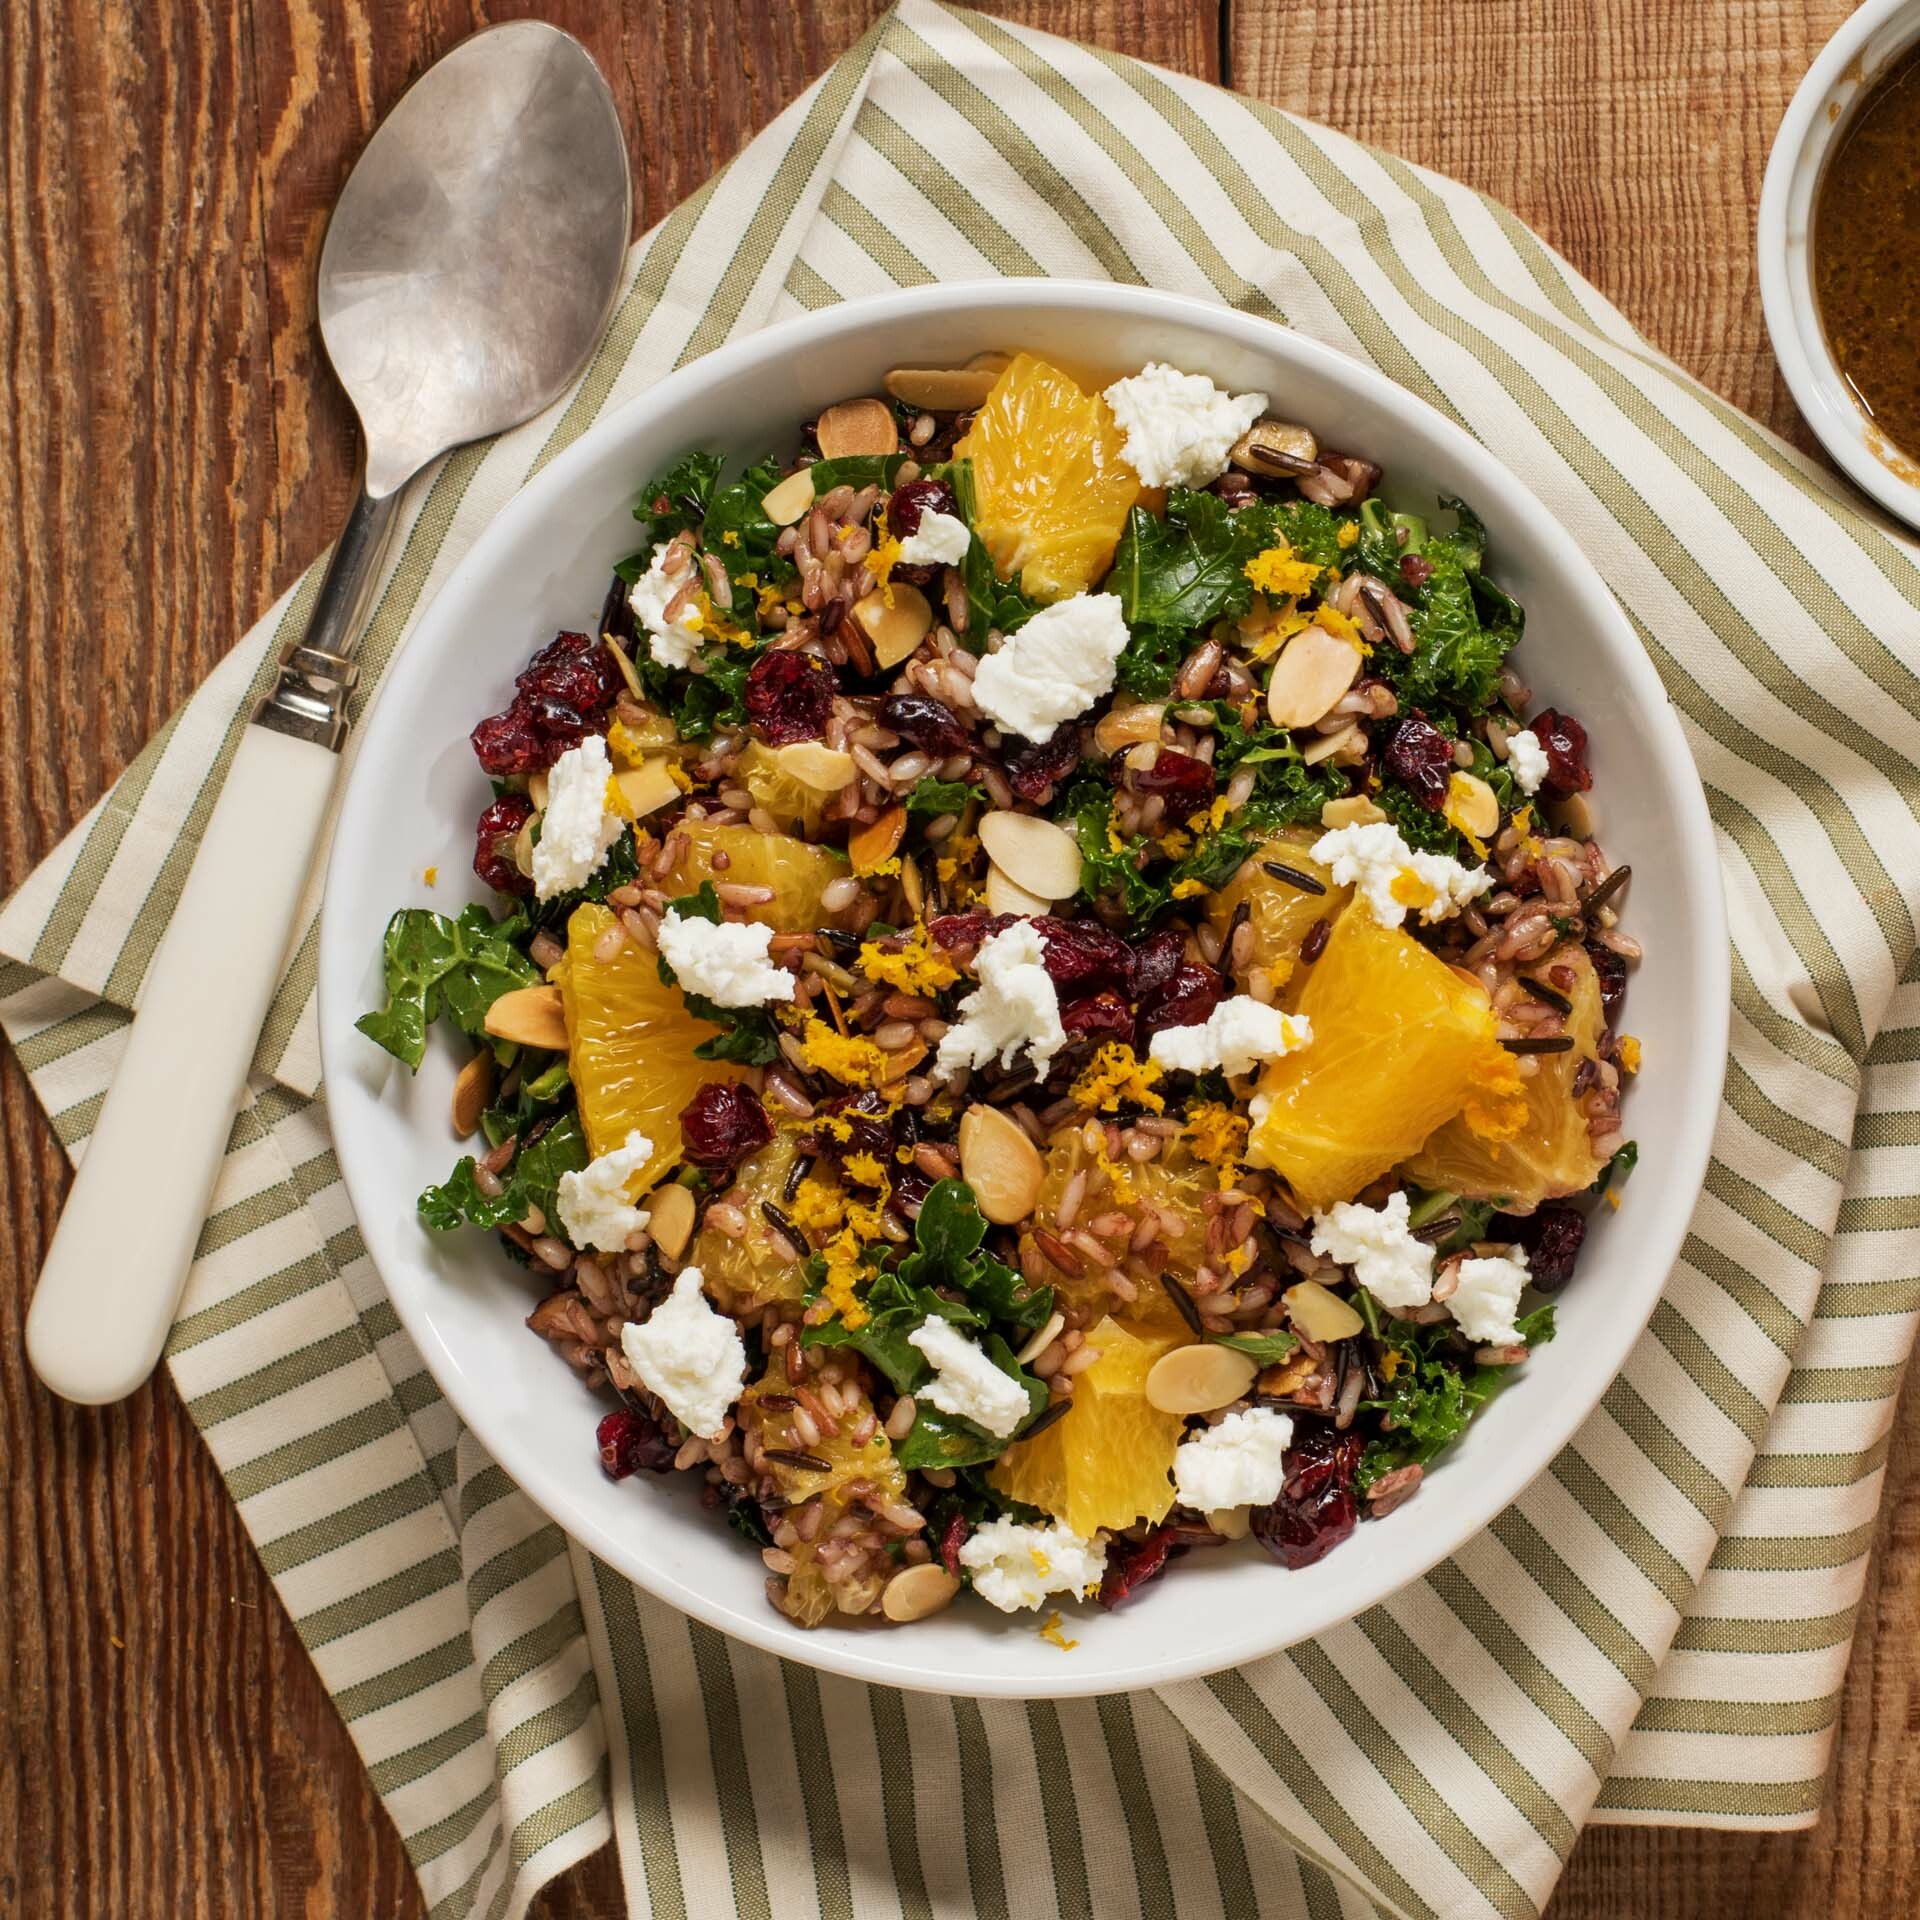 Fall Wild Blend Rice Salad made with Lundberg Wild Blend Rice